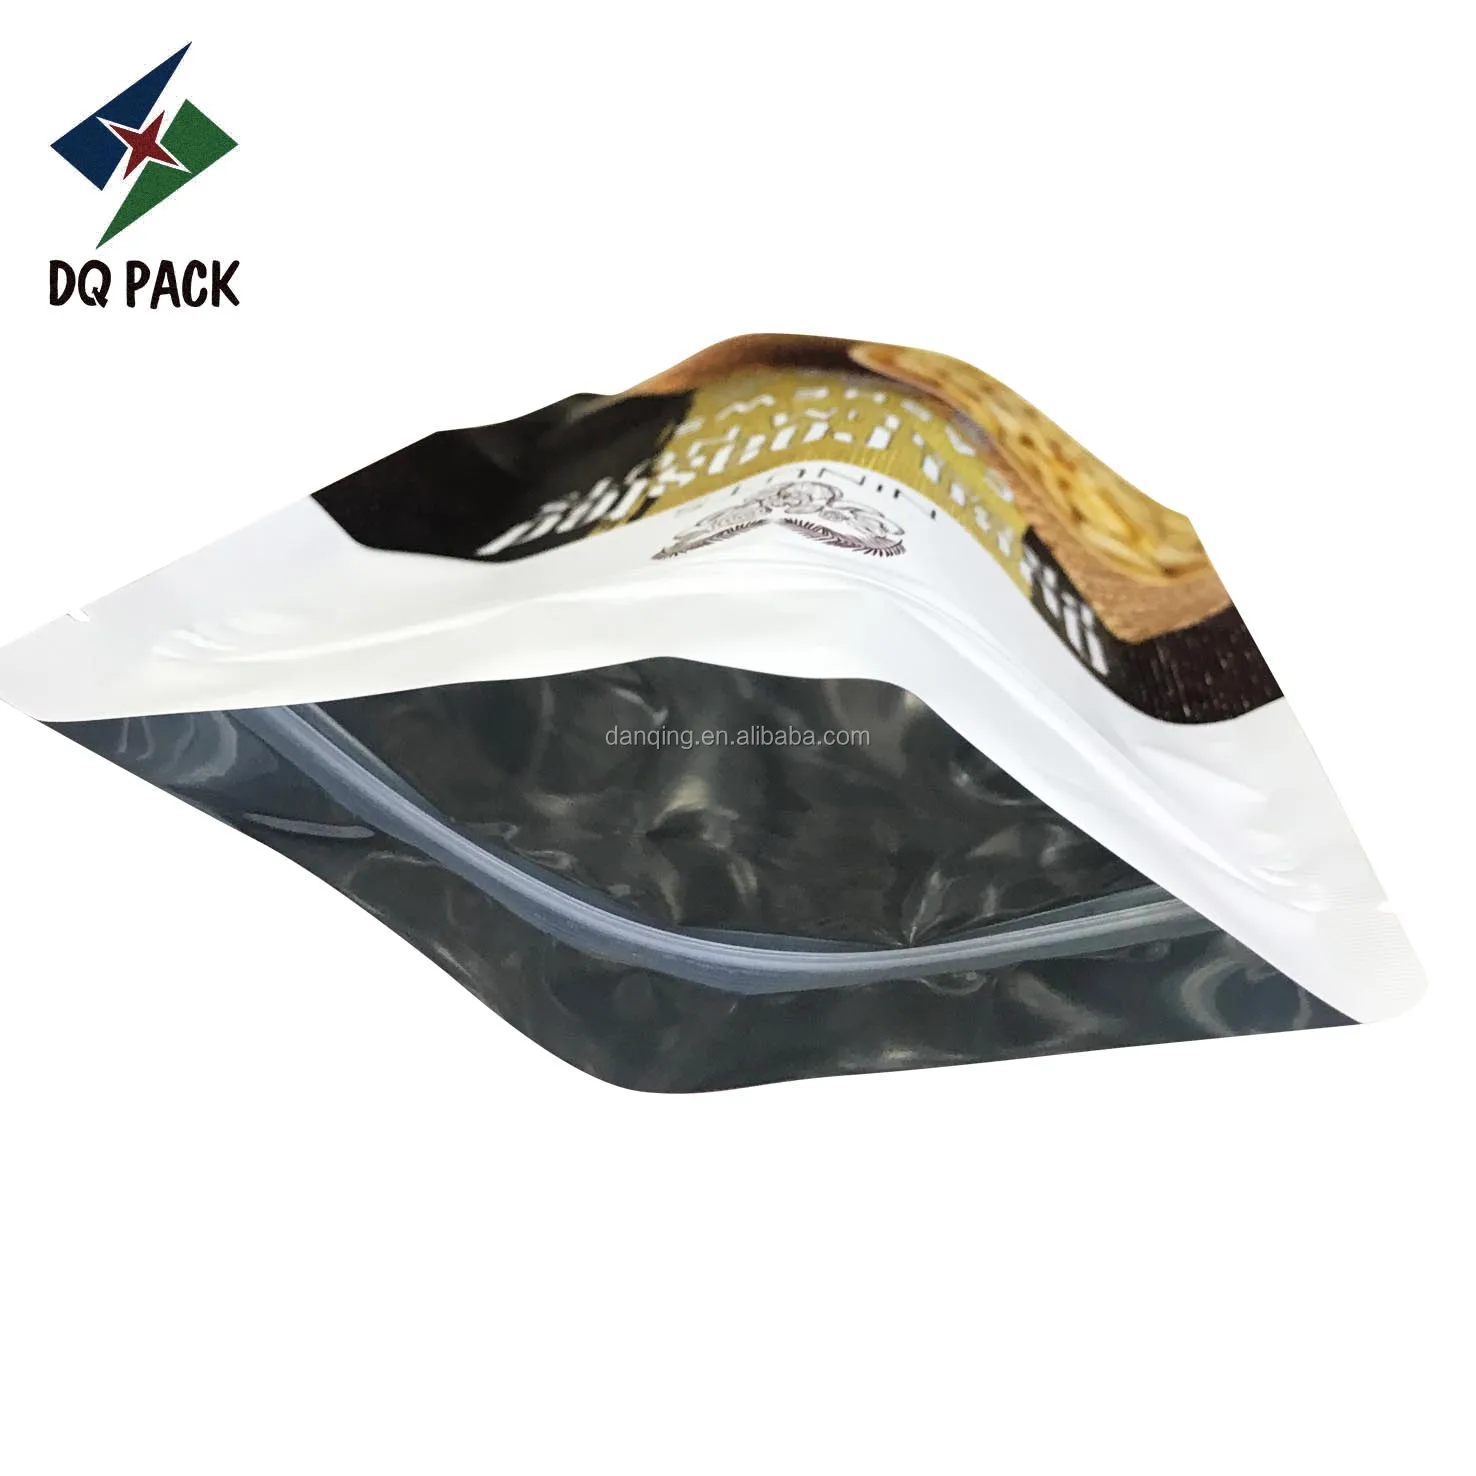 DQ PACK Food Grade Printed Bags For Packaging Nuts